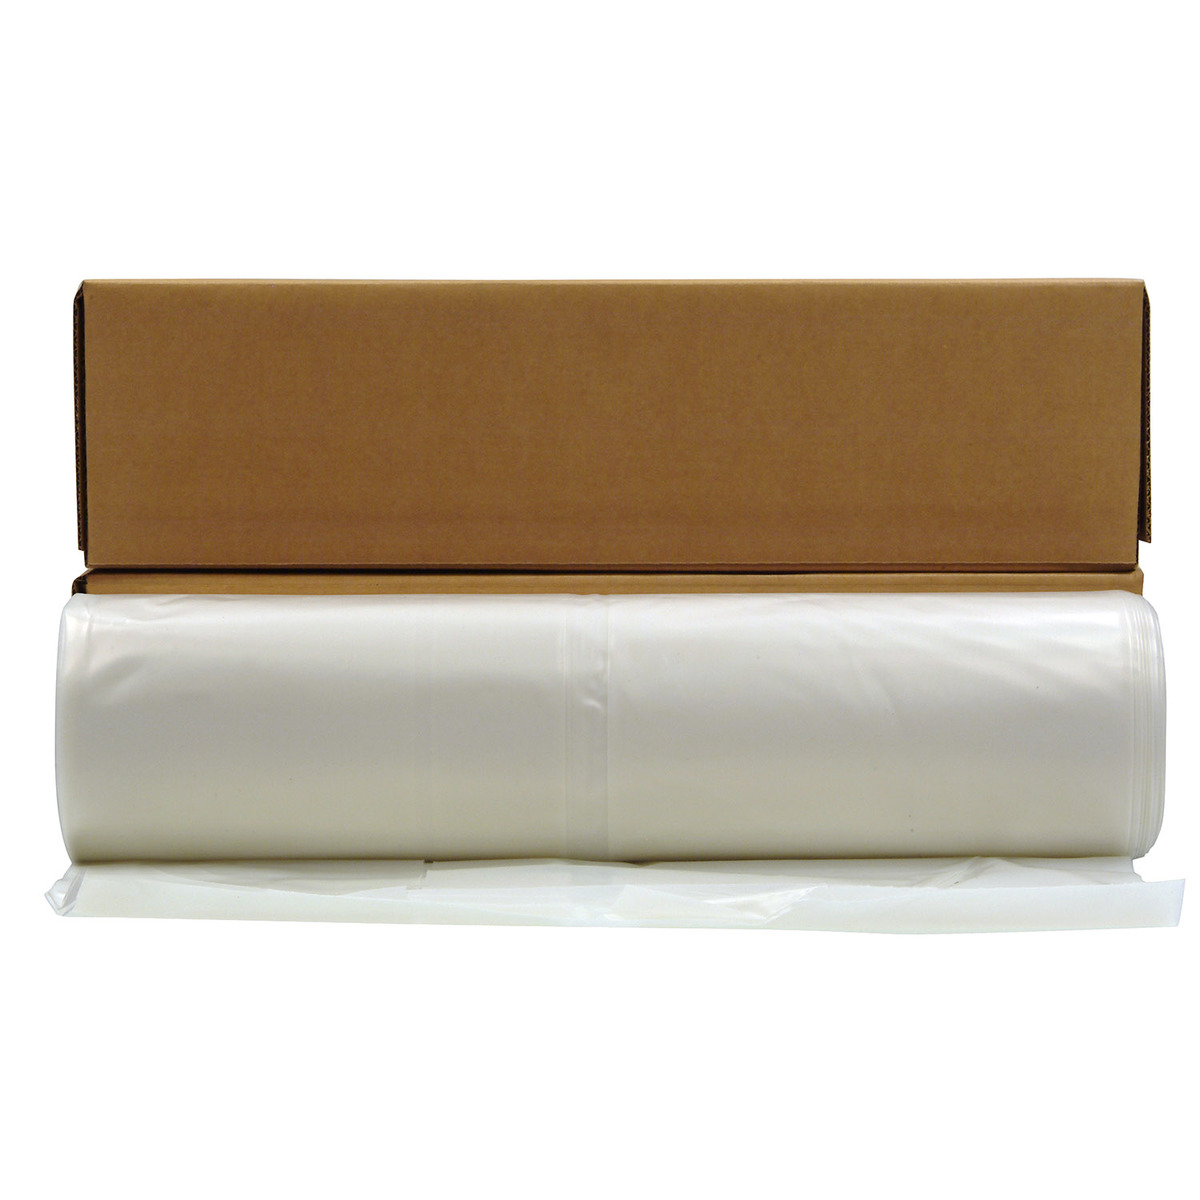 Plastic Sheeting Roll EXTRA HEAVY DUTY 12 ft x 100 ft White Clear Opaque 6 mil 